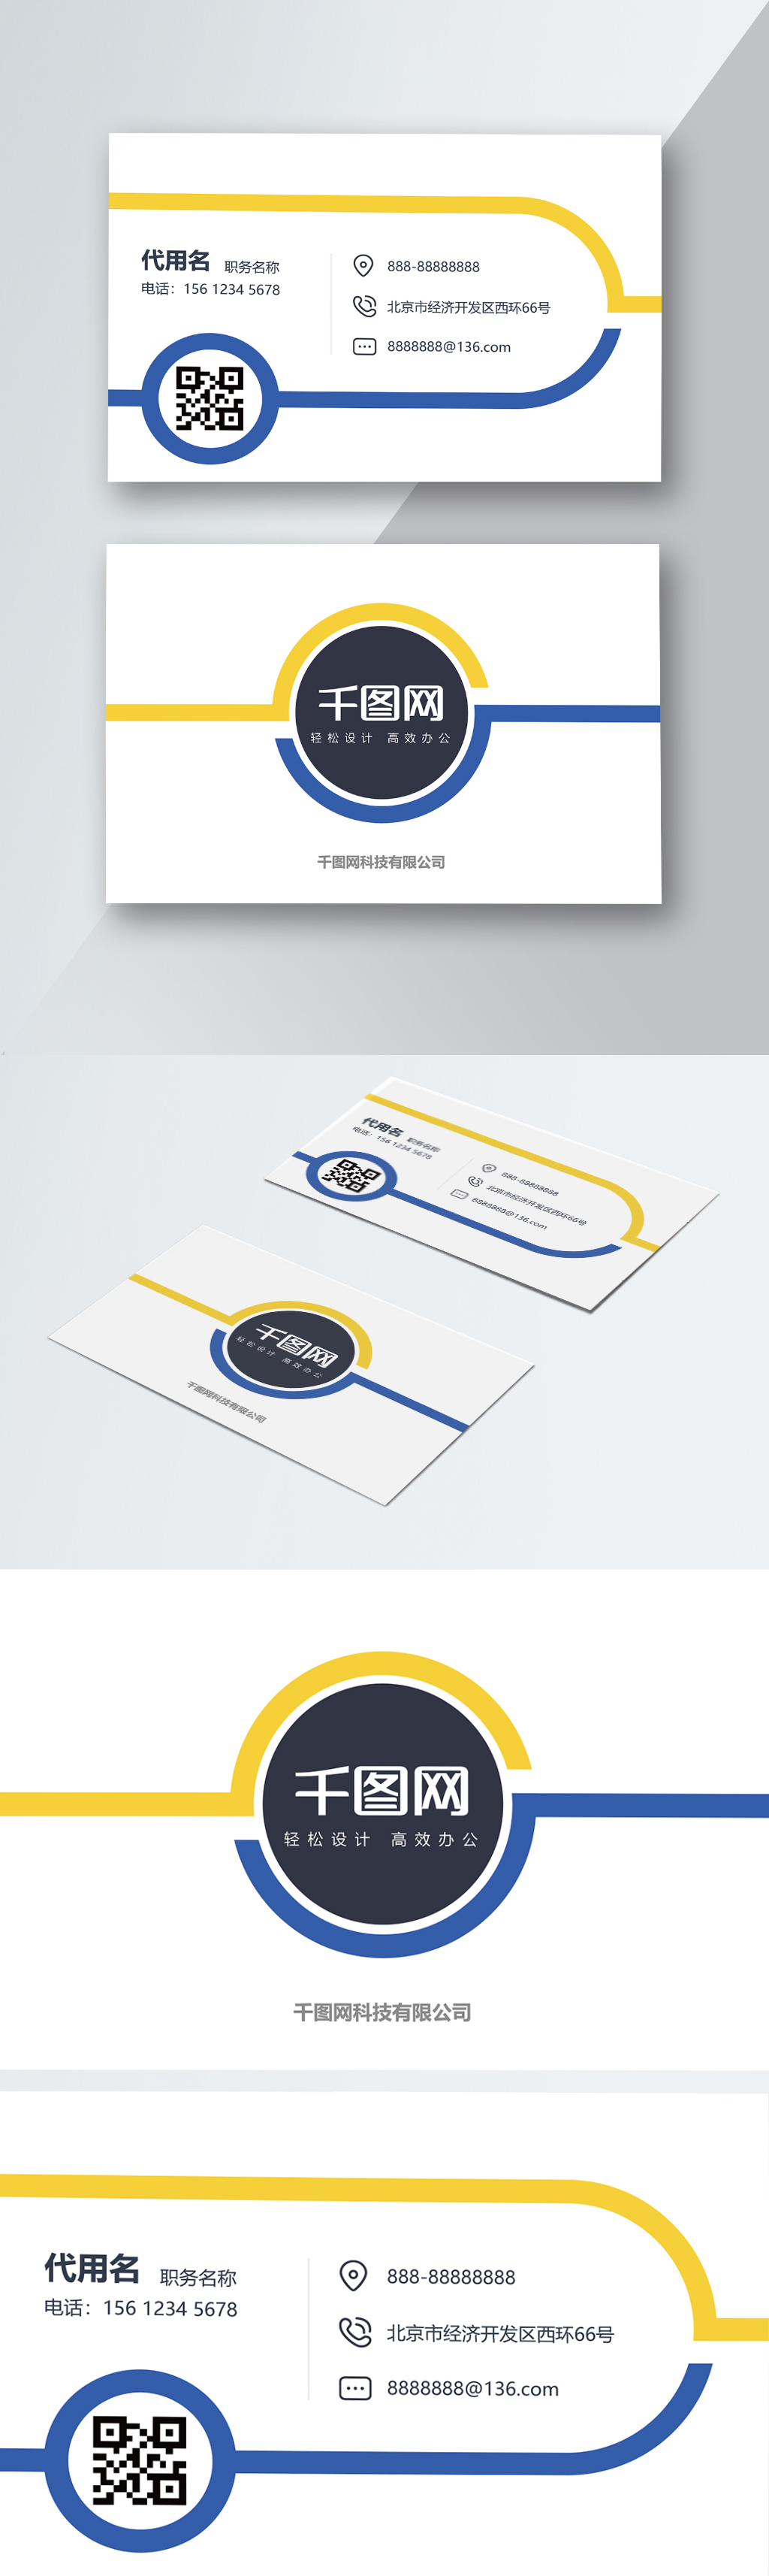 Download Stylish Minimalist Yellow Business Card Template Image Picture Free Download 732614632 Lovepik Com Yellowimages Mockups